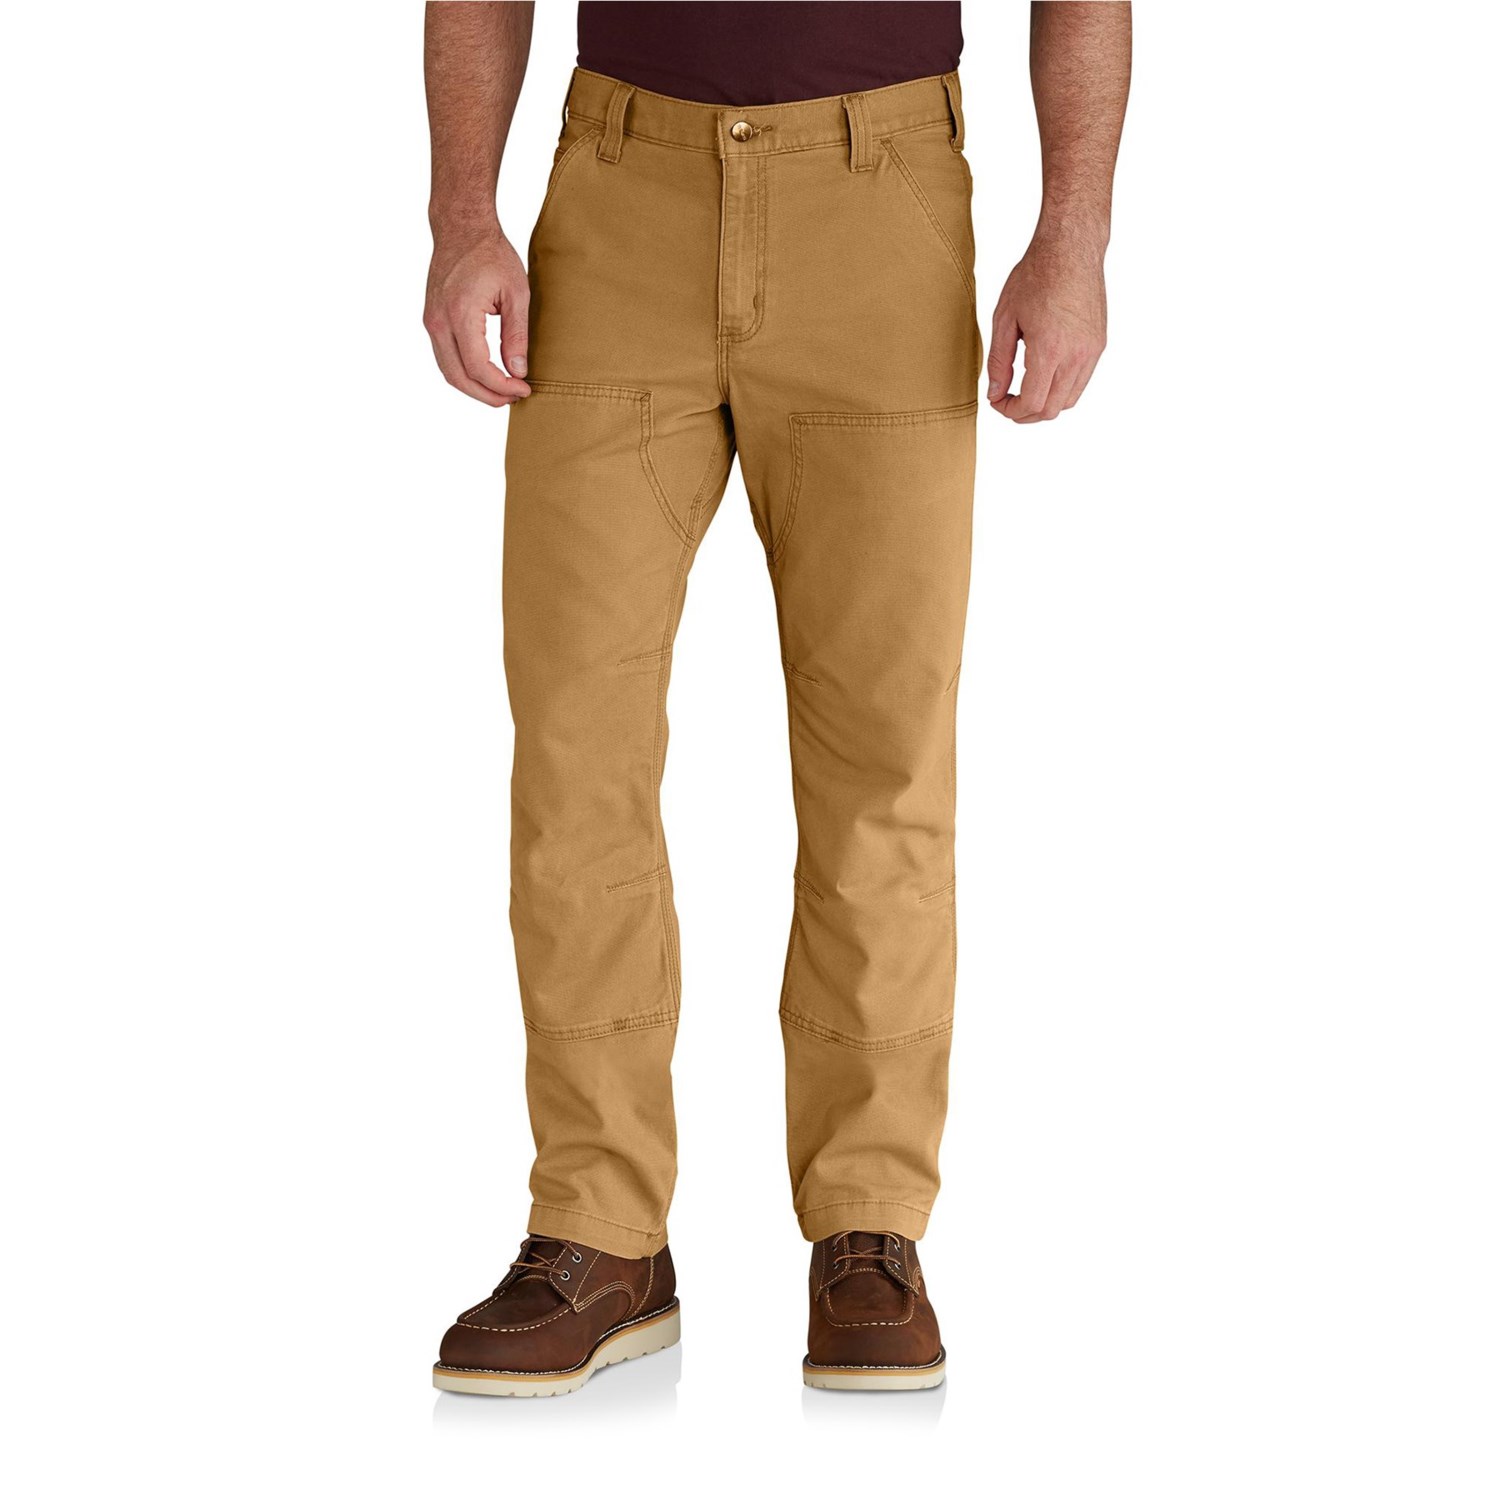 Carhartt 102802 Rugged Flex Rigby Double-Front Pants - Factory Seconds